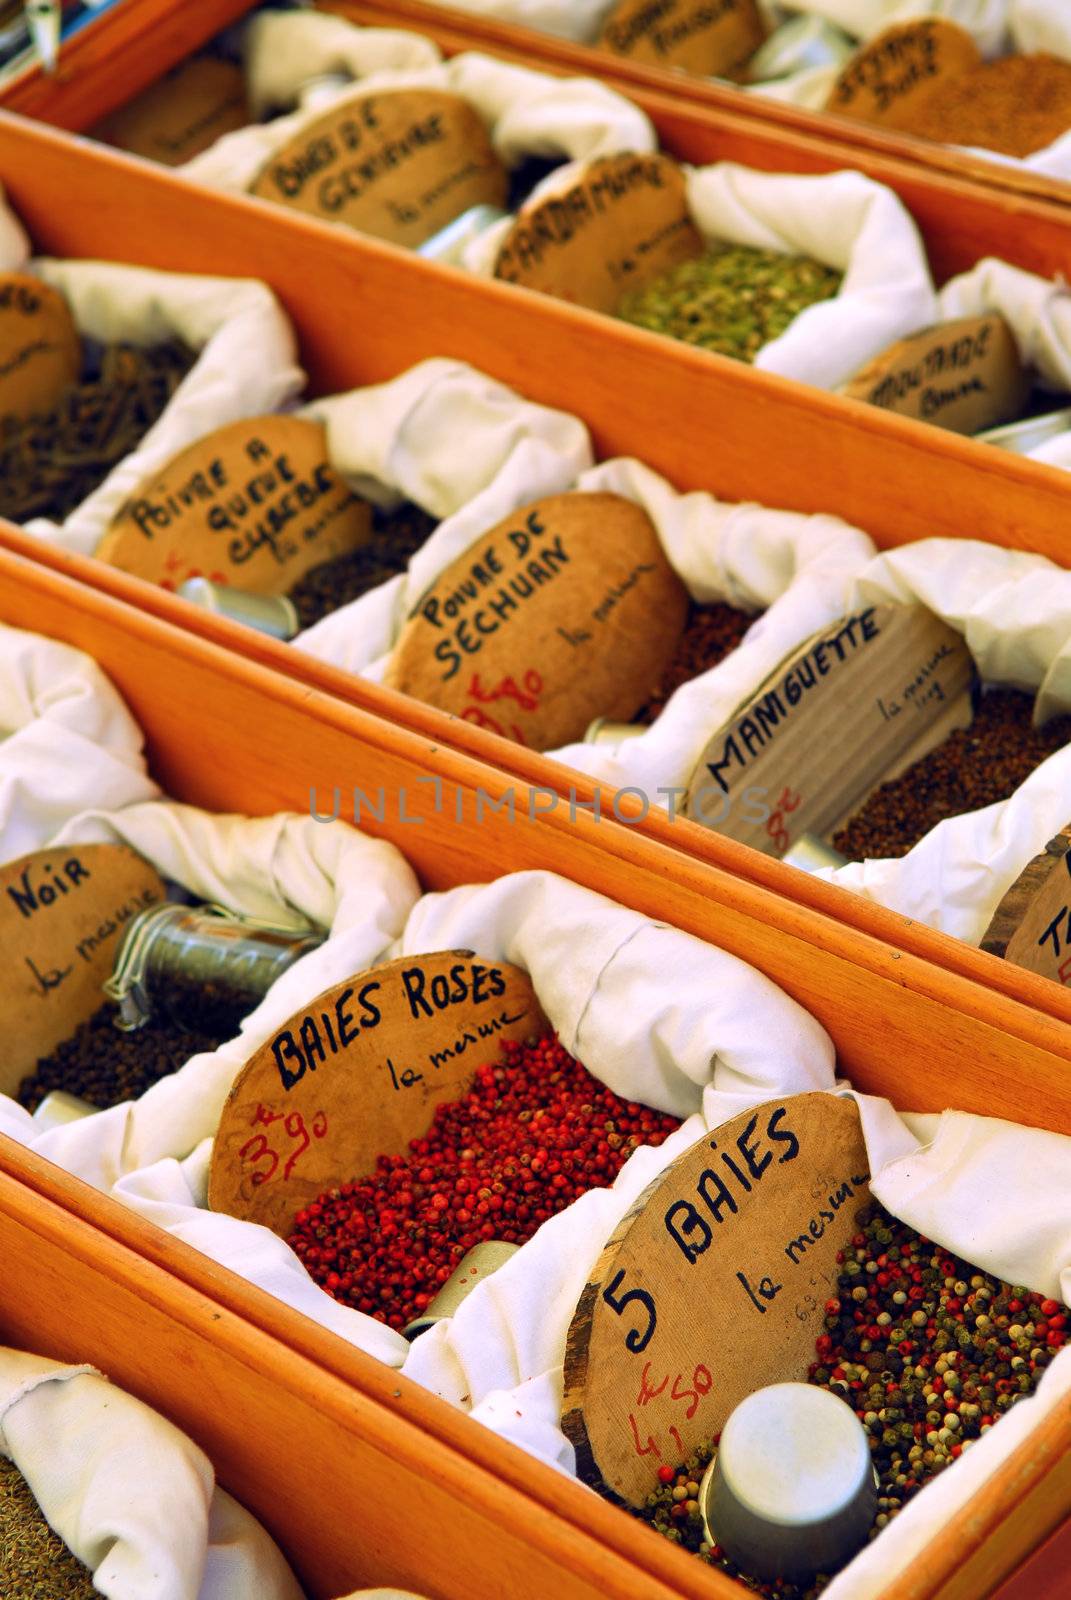 Spices on the market by elenathewise